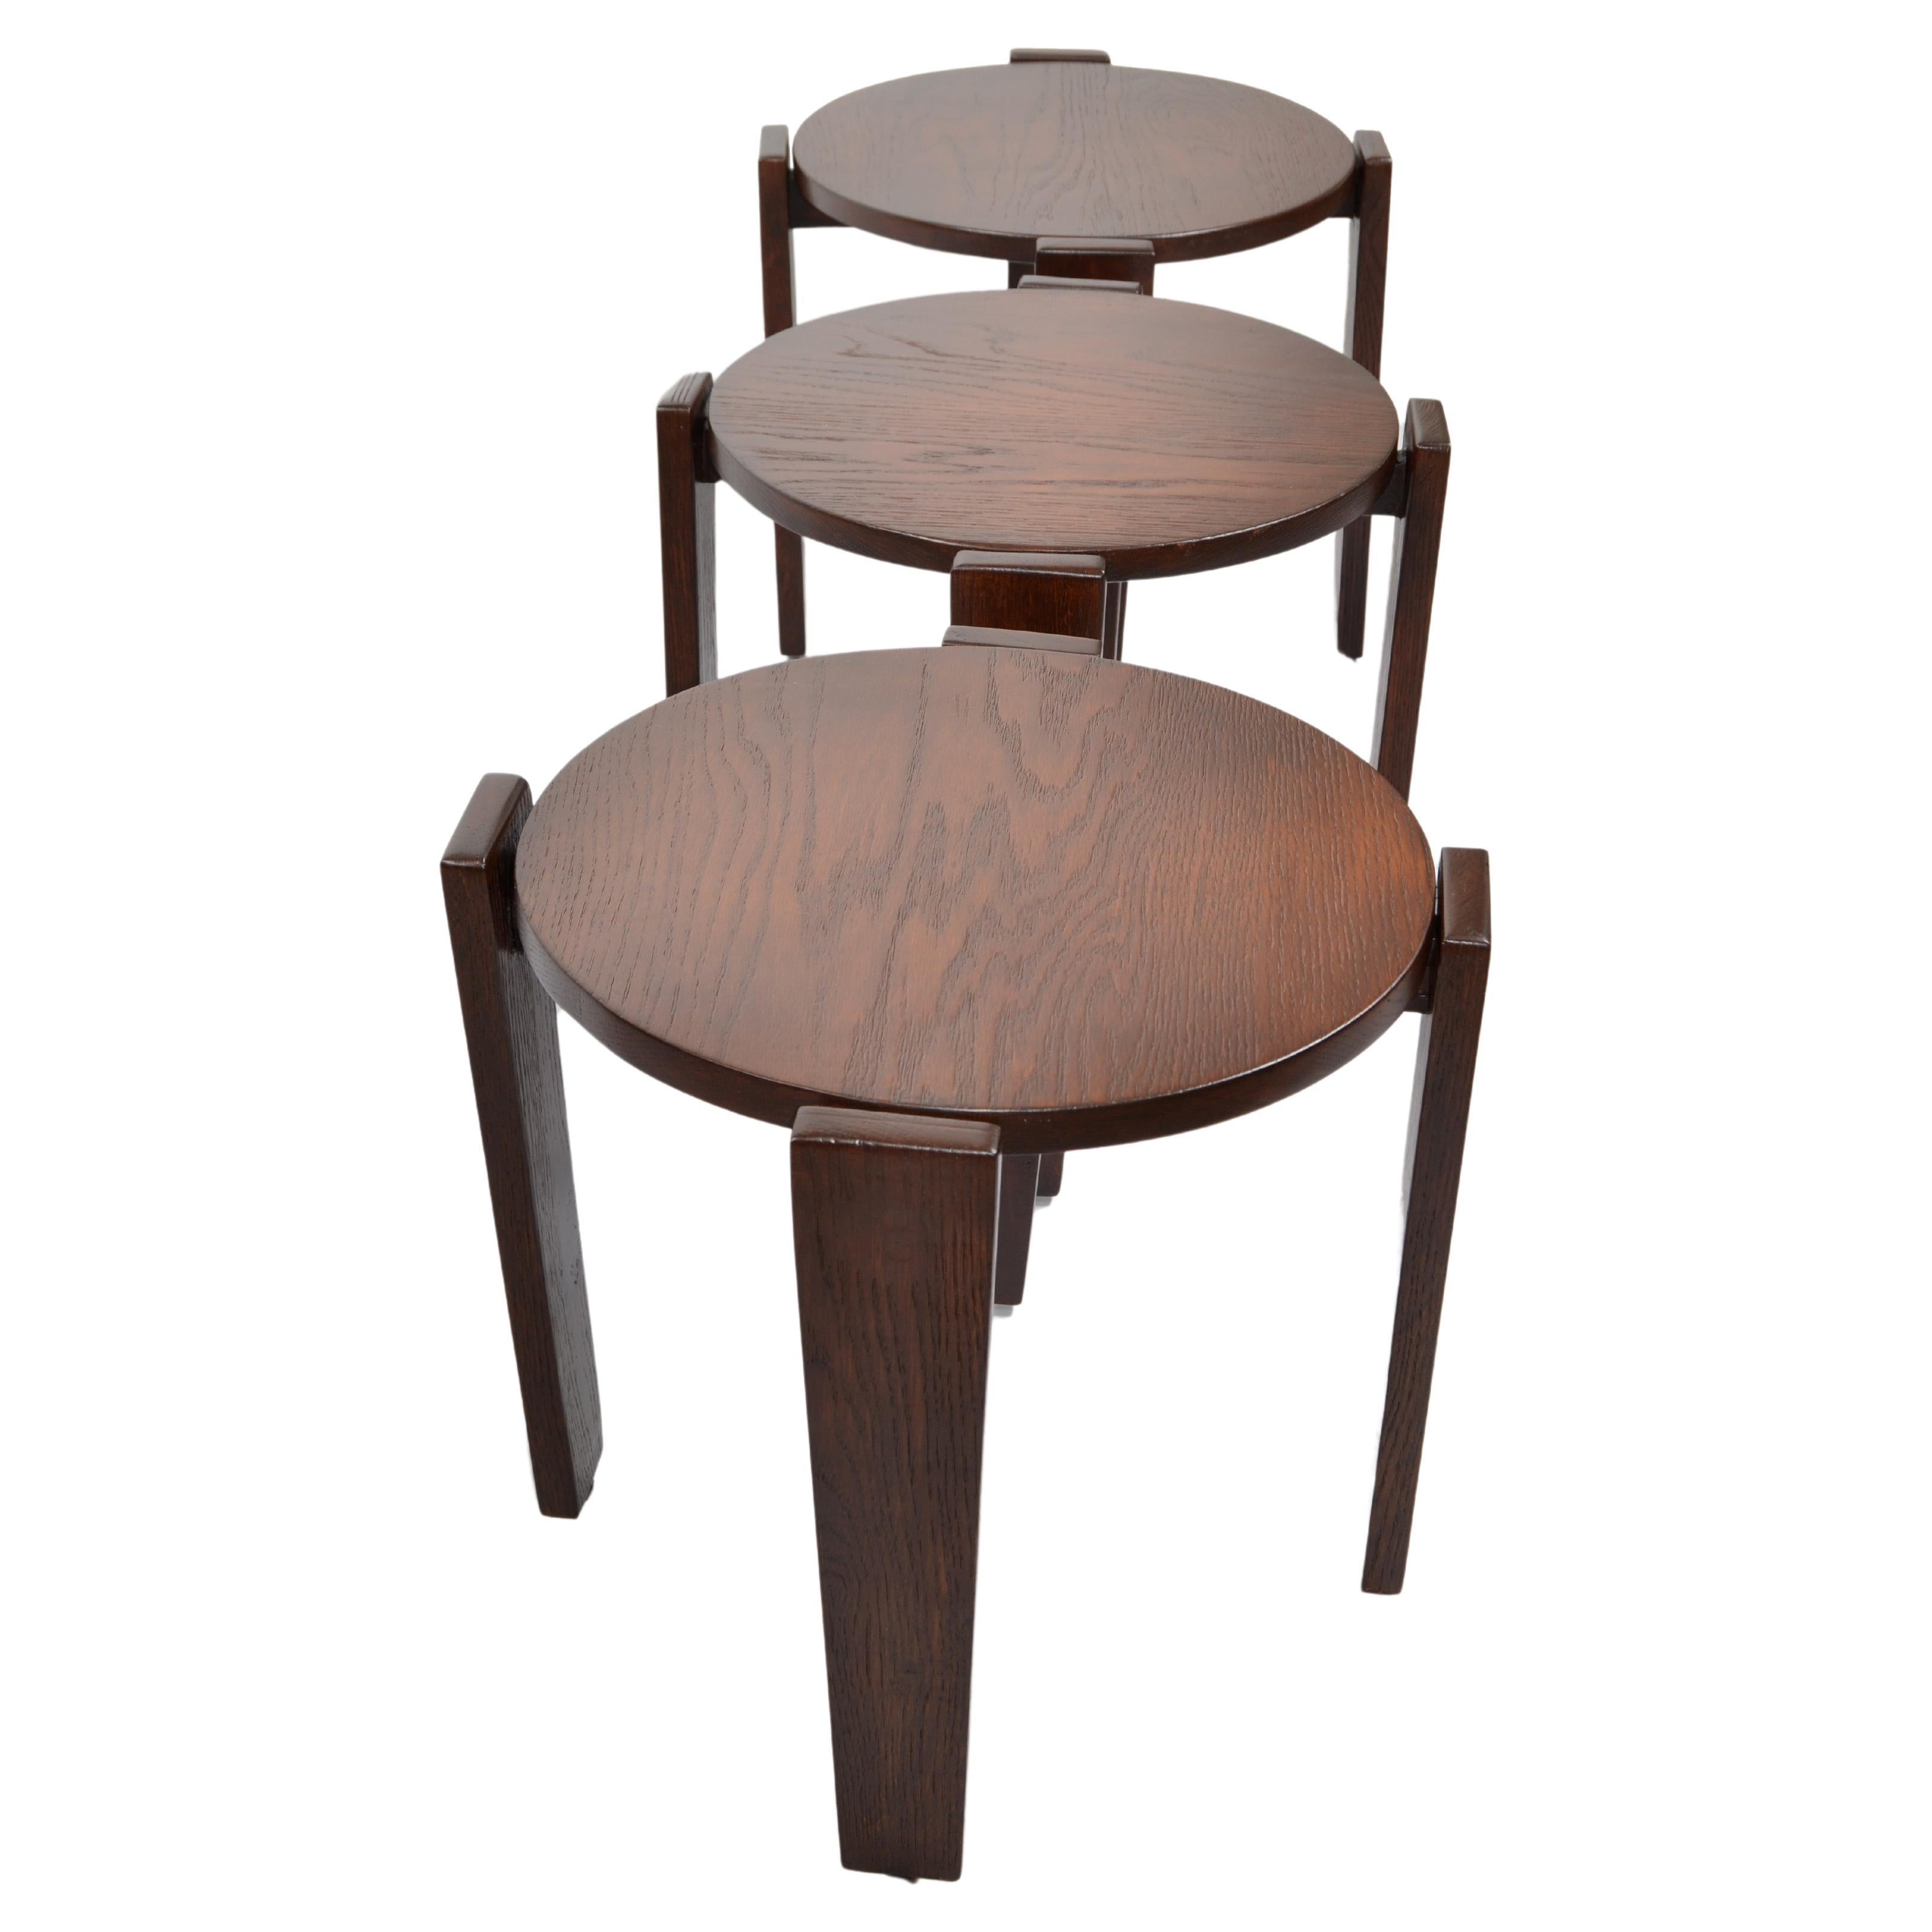 Set 3 Walnut Nesting Tables Stacking Tables Side Tables Bauhaus Bruno Rey Style